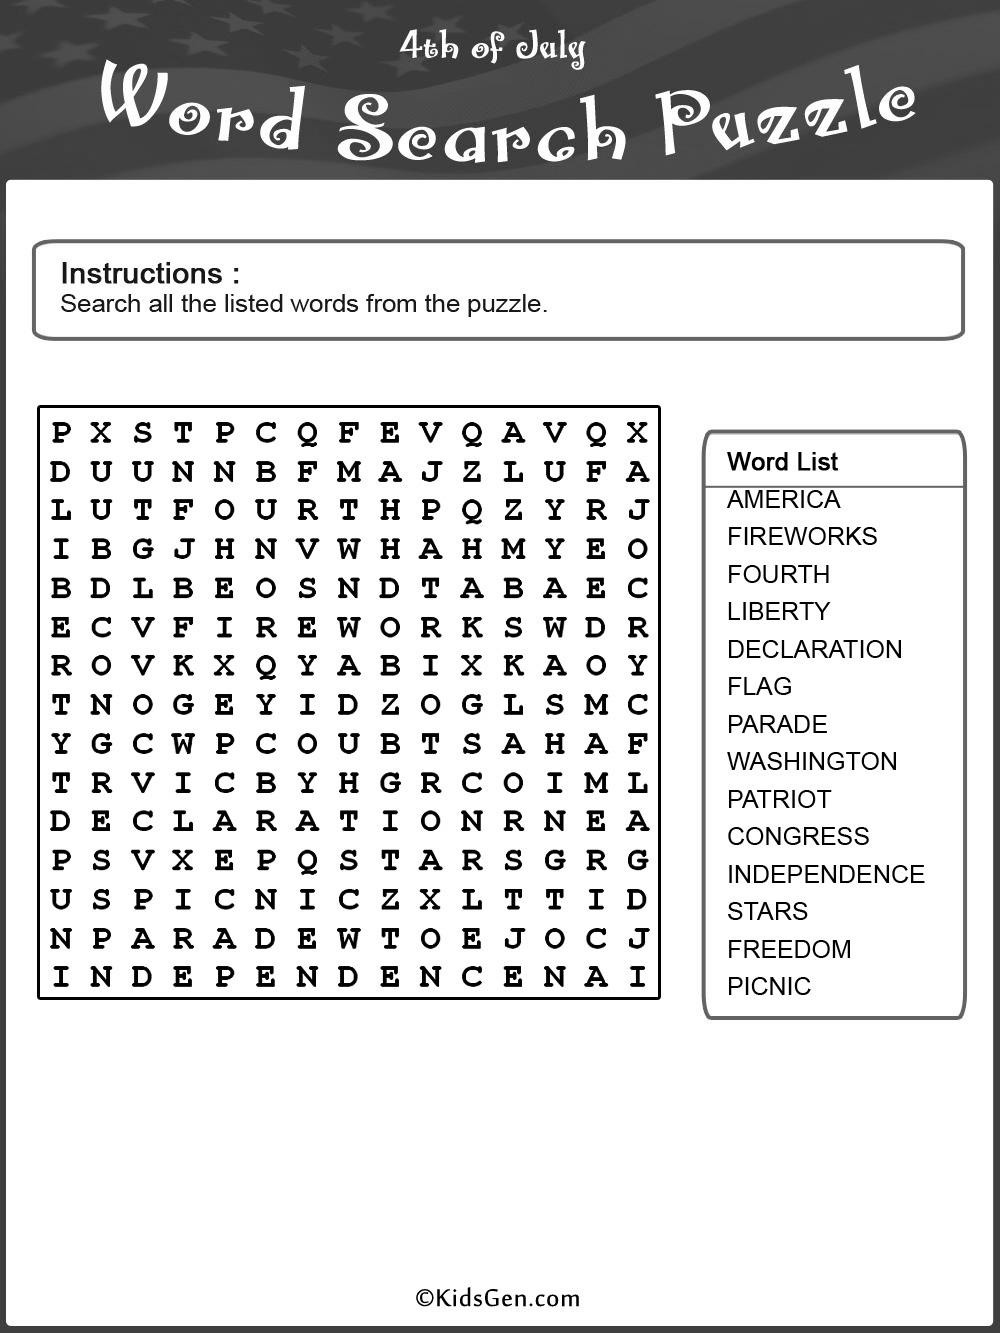 Black History Word Search Puzzle Printable Image